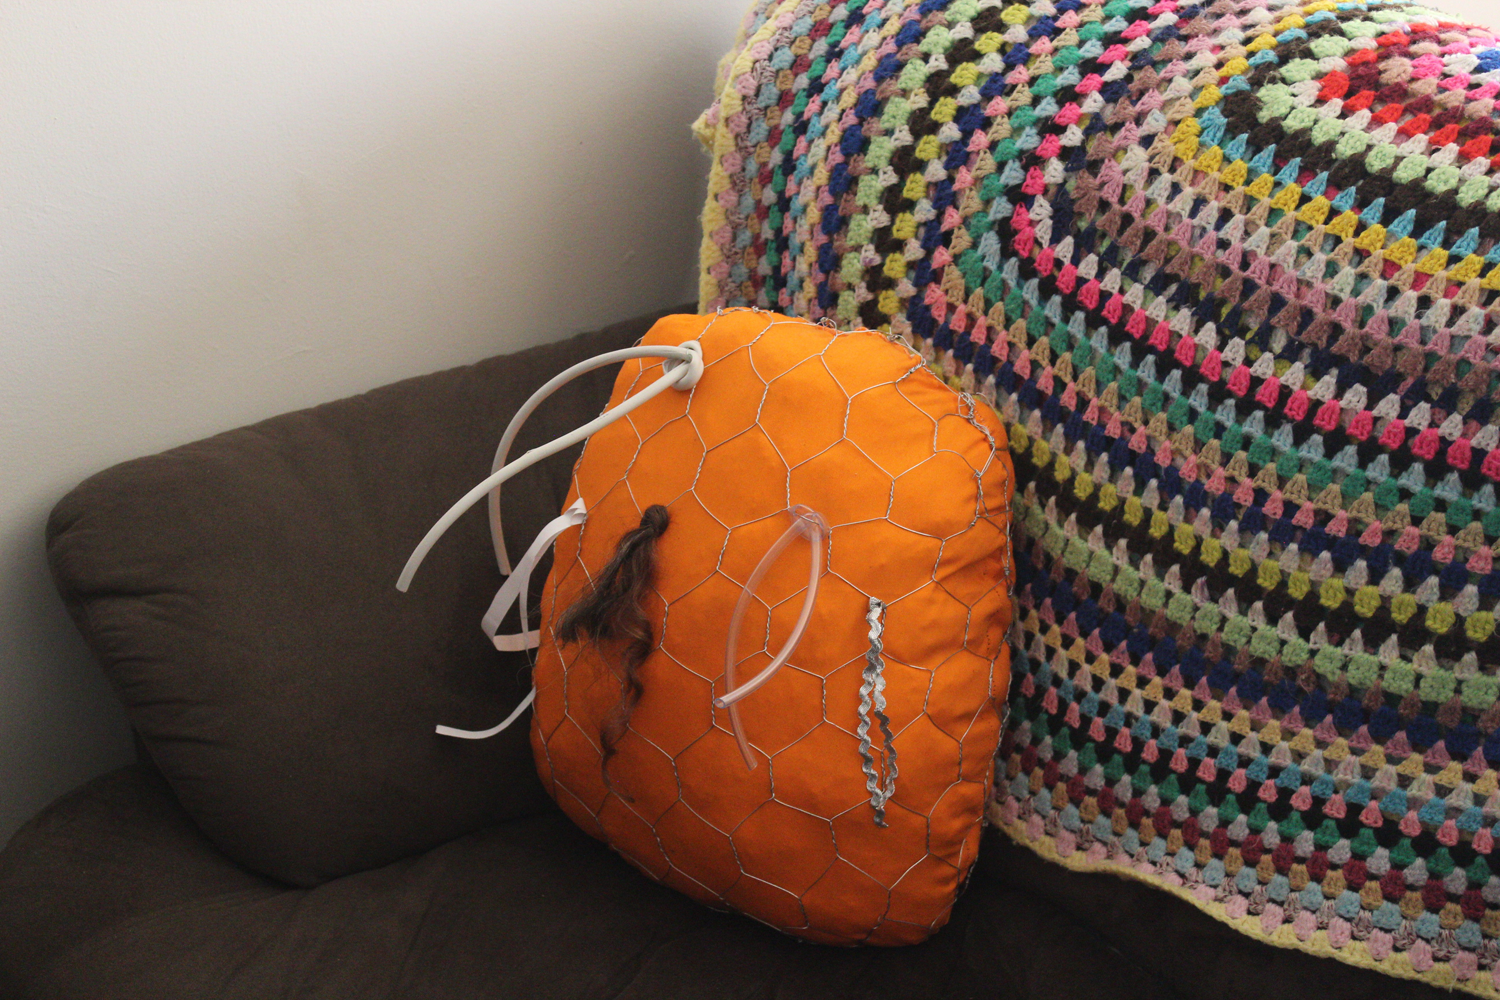 Orange soft sculpture sitting on brown couch with crocheted blanket